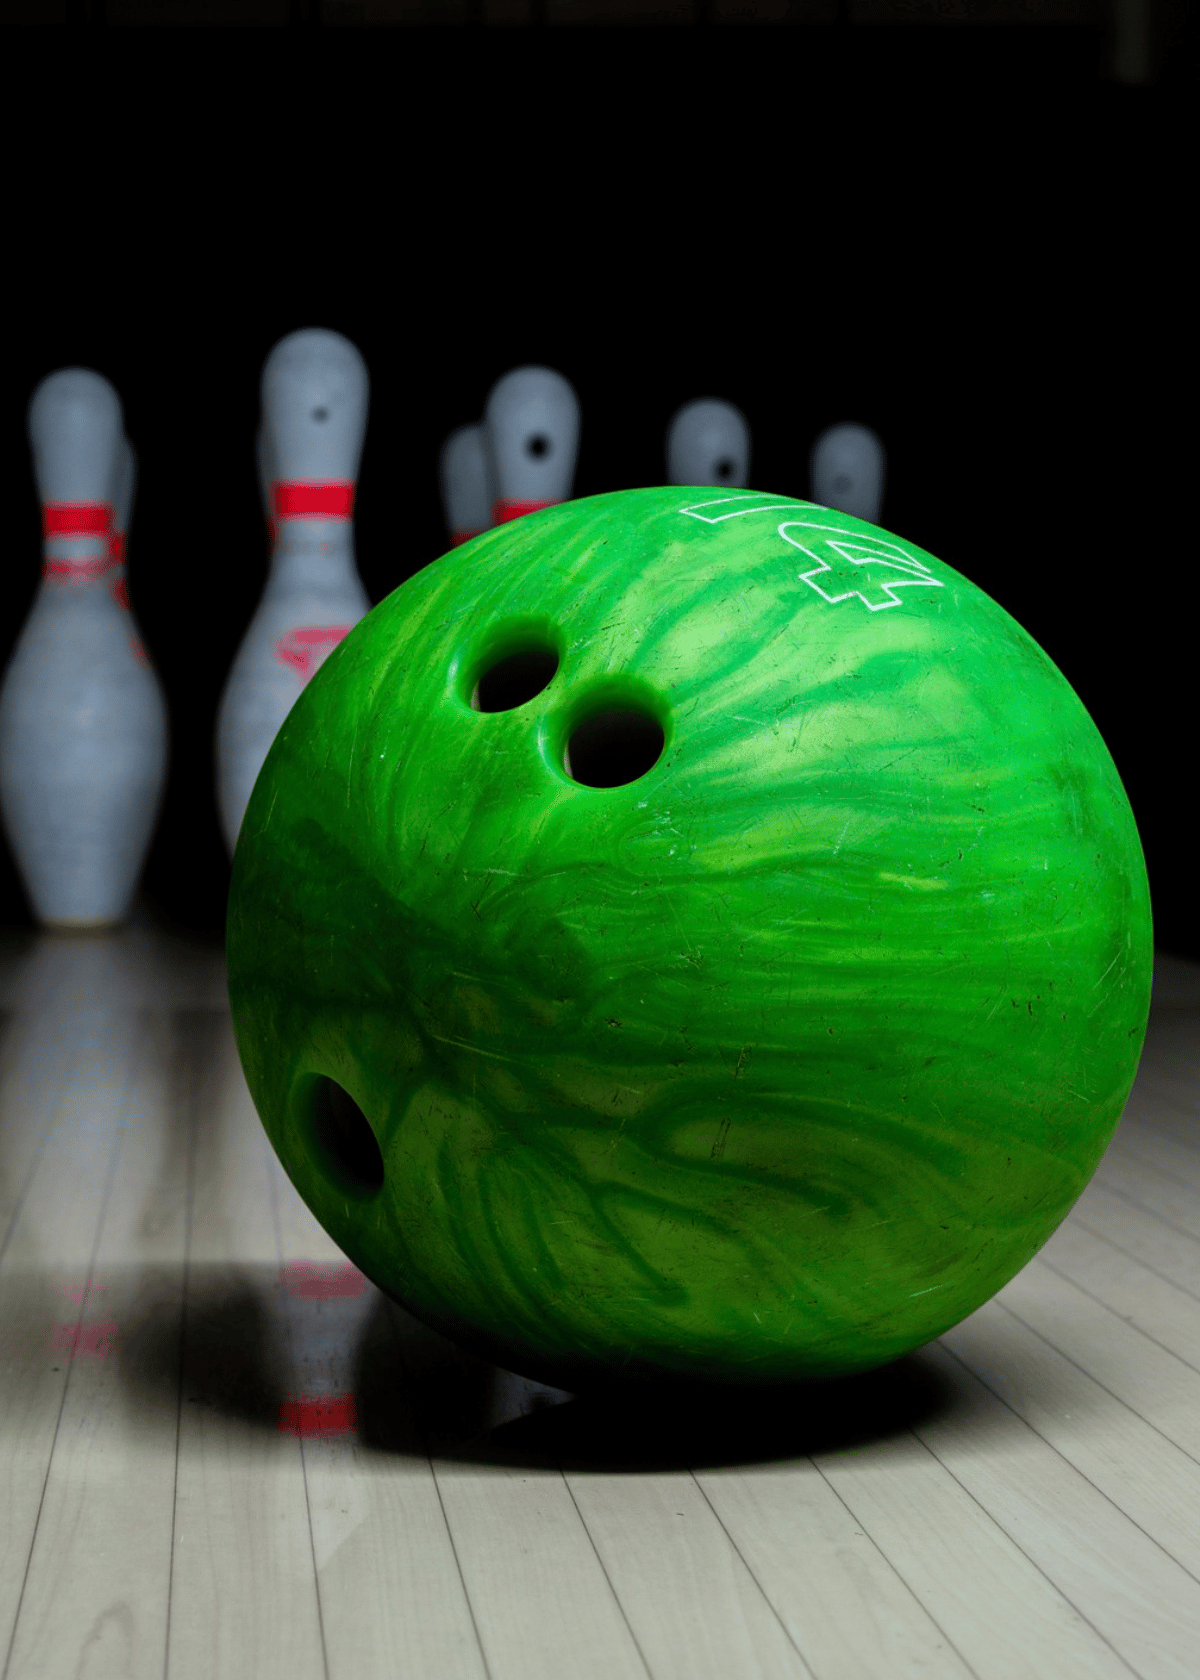 Bowling ball for beginners